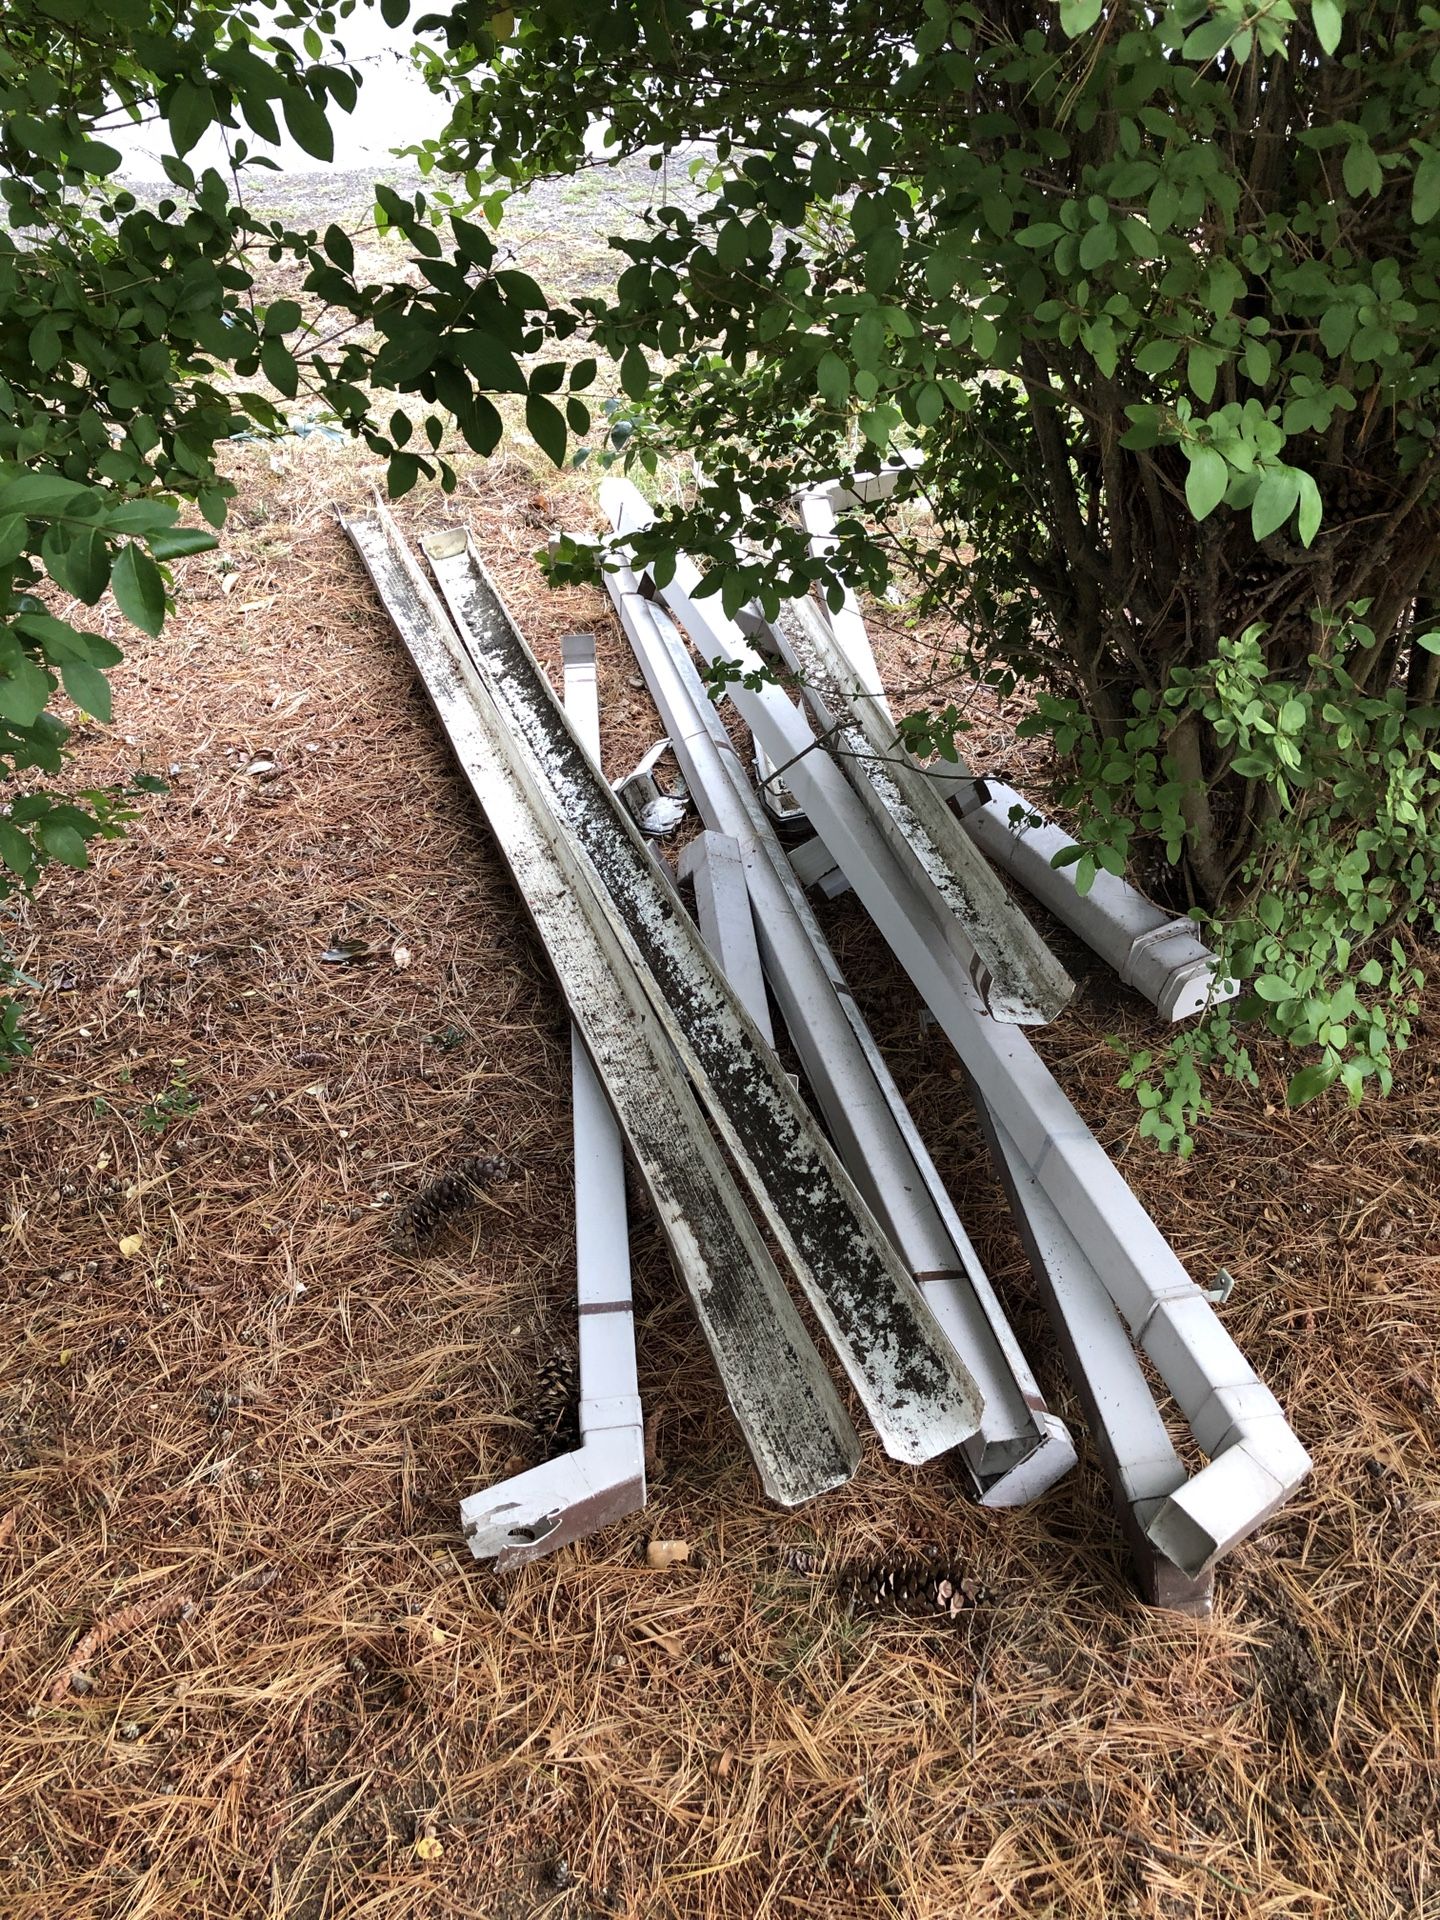 Available. Free used rain gutters/ downspouts pickup in white center